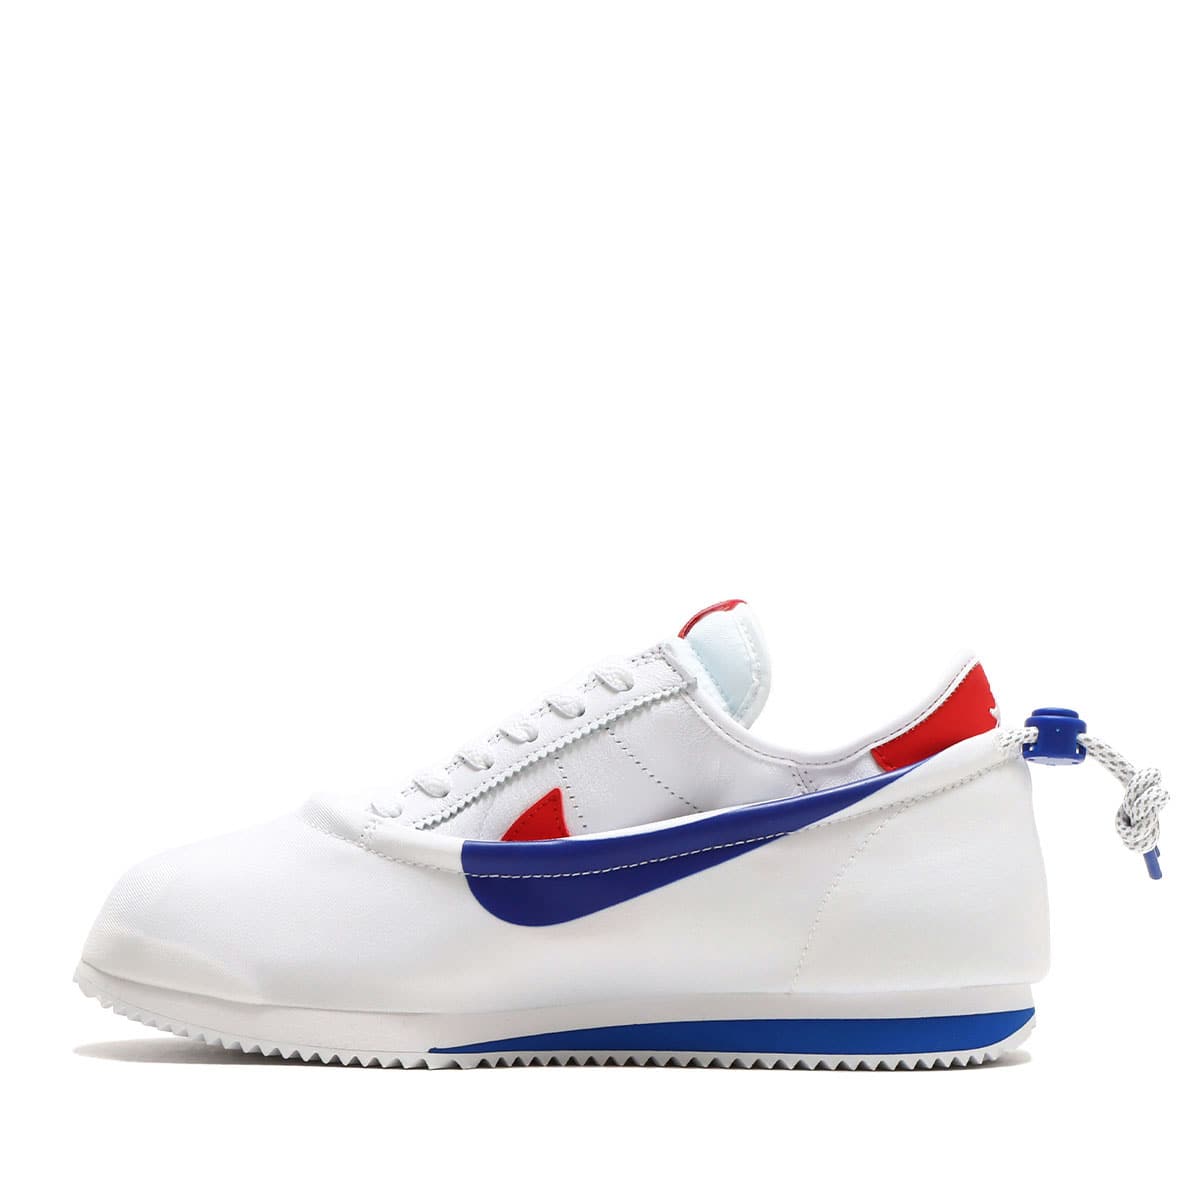 CLOT × Nike Cortez White and GameRoyal28